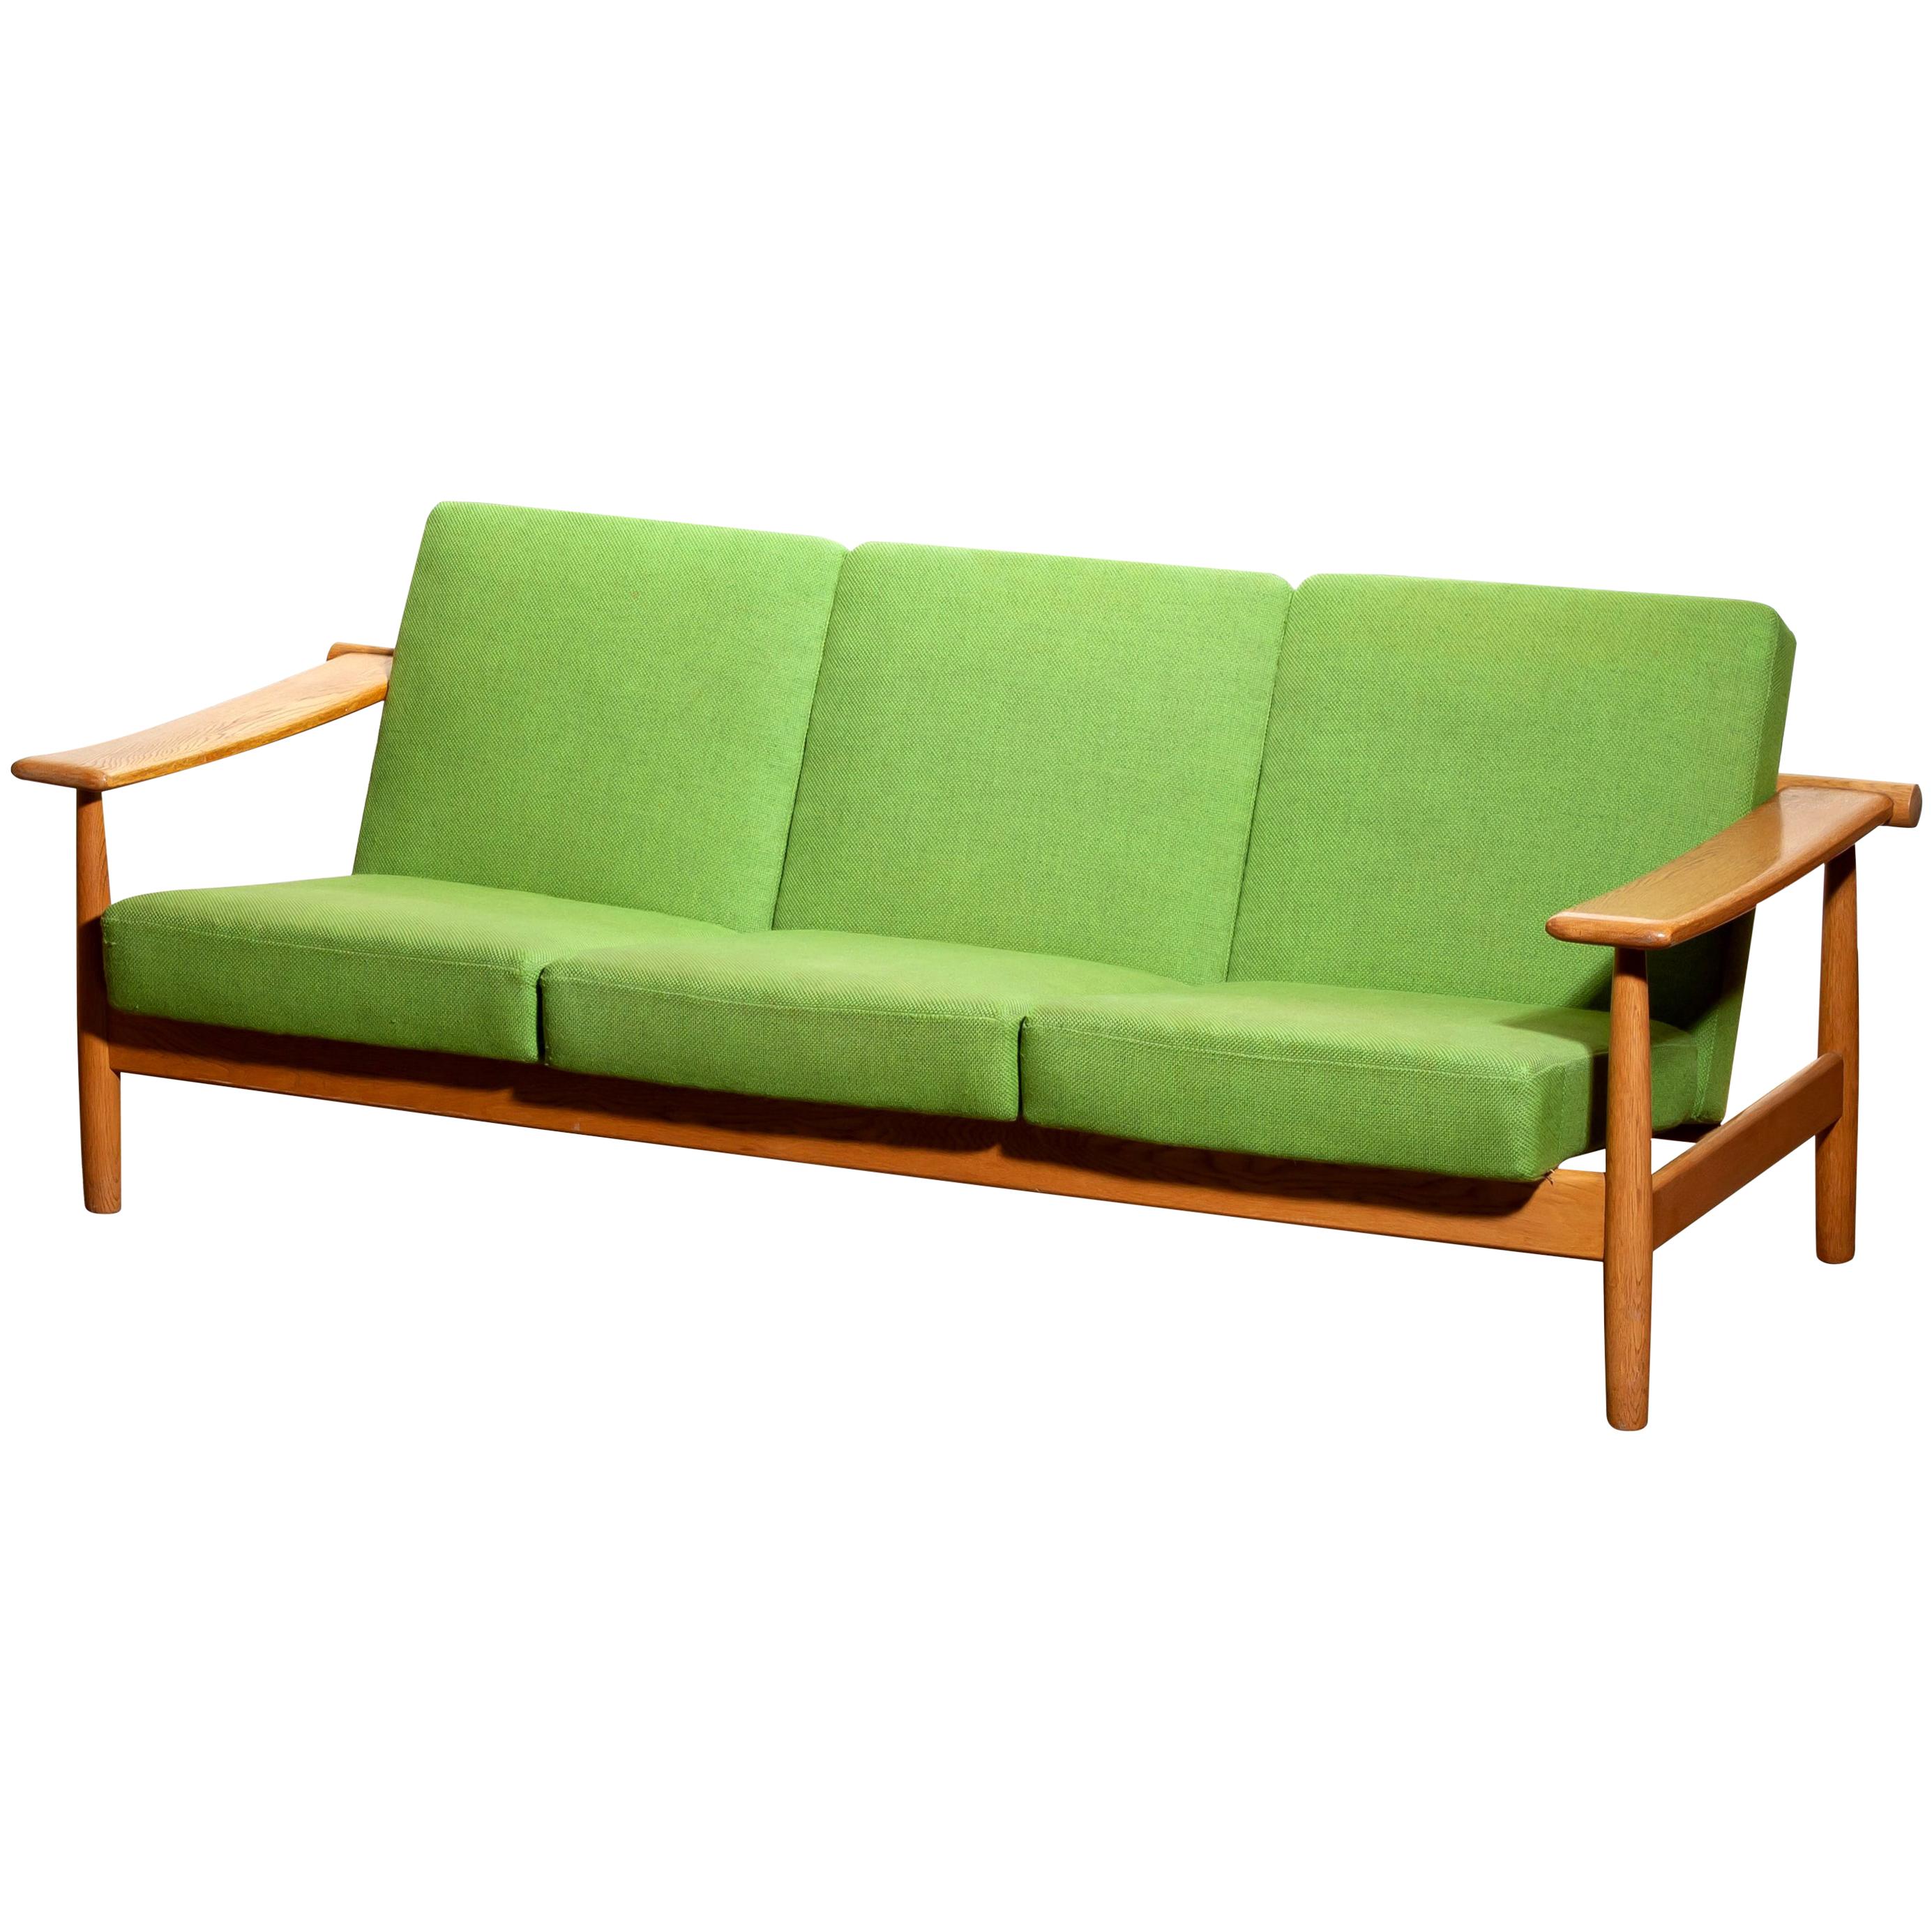 Beautiful oak sofa from the 1960s made in Denmark.
The oak frame is in good condition.
The green fabric is in fair condition like the pictures shows.




 